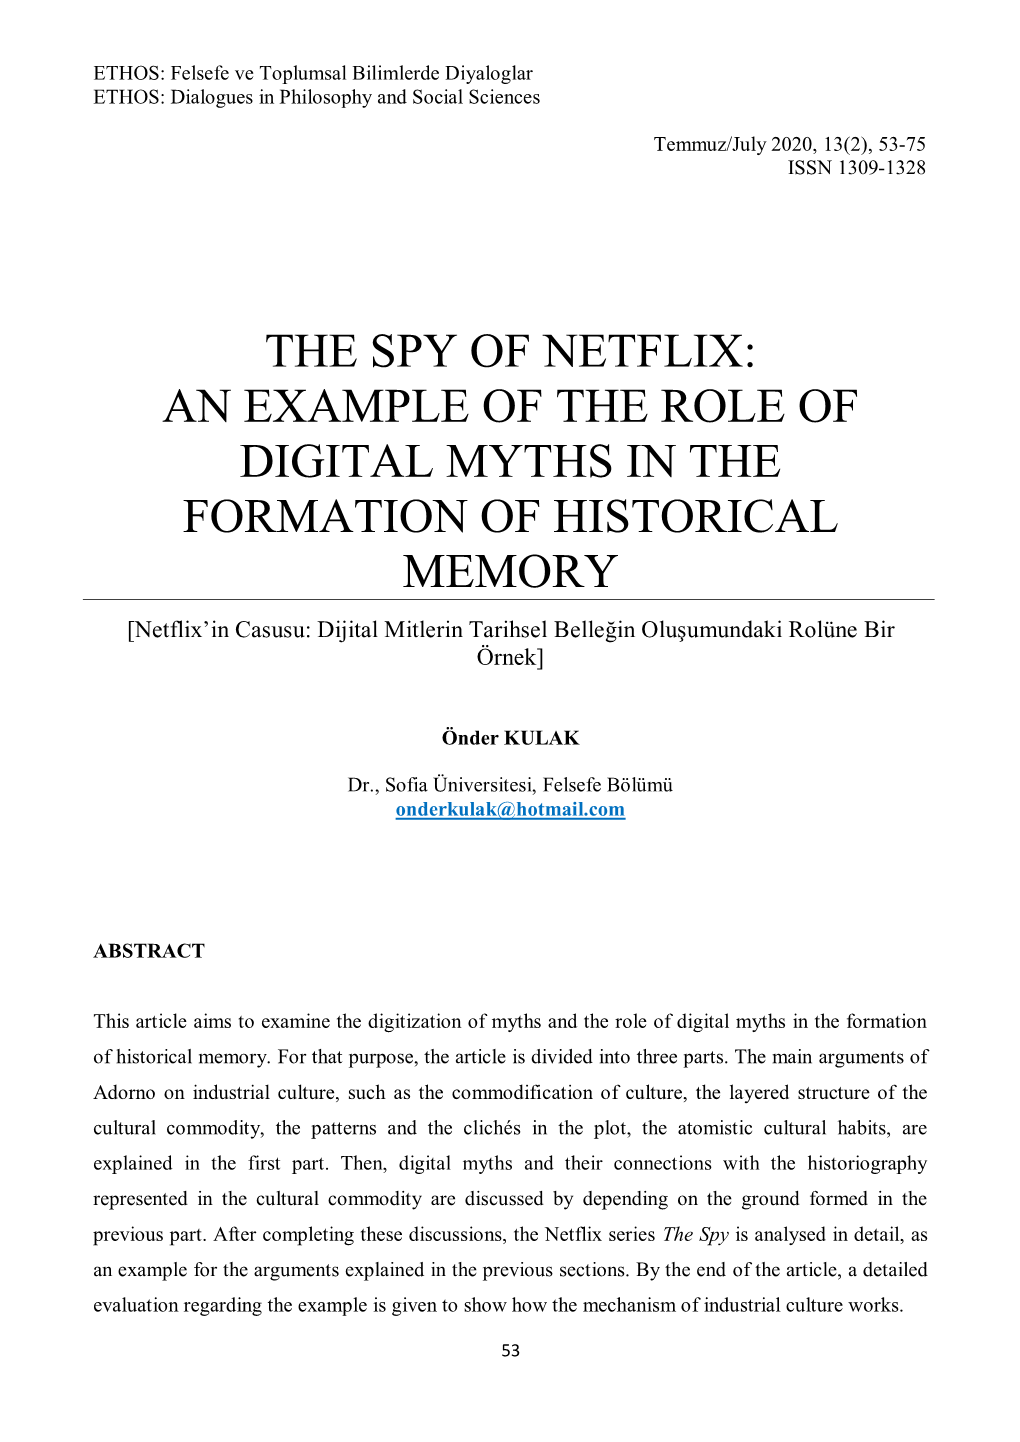 The Spy of Netflix: an Example of the Role of Digital Myths in the Formation of Historical Memory